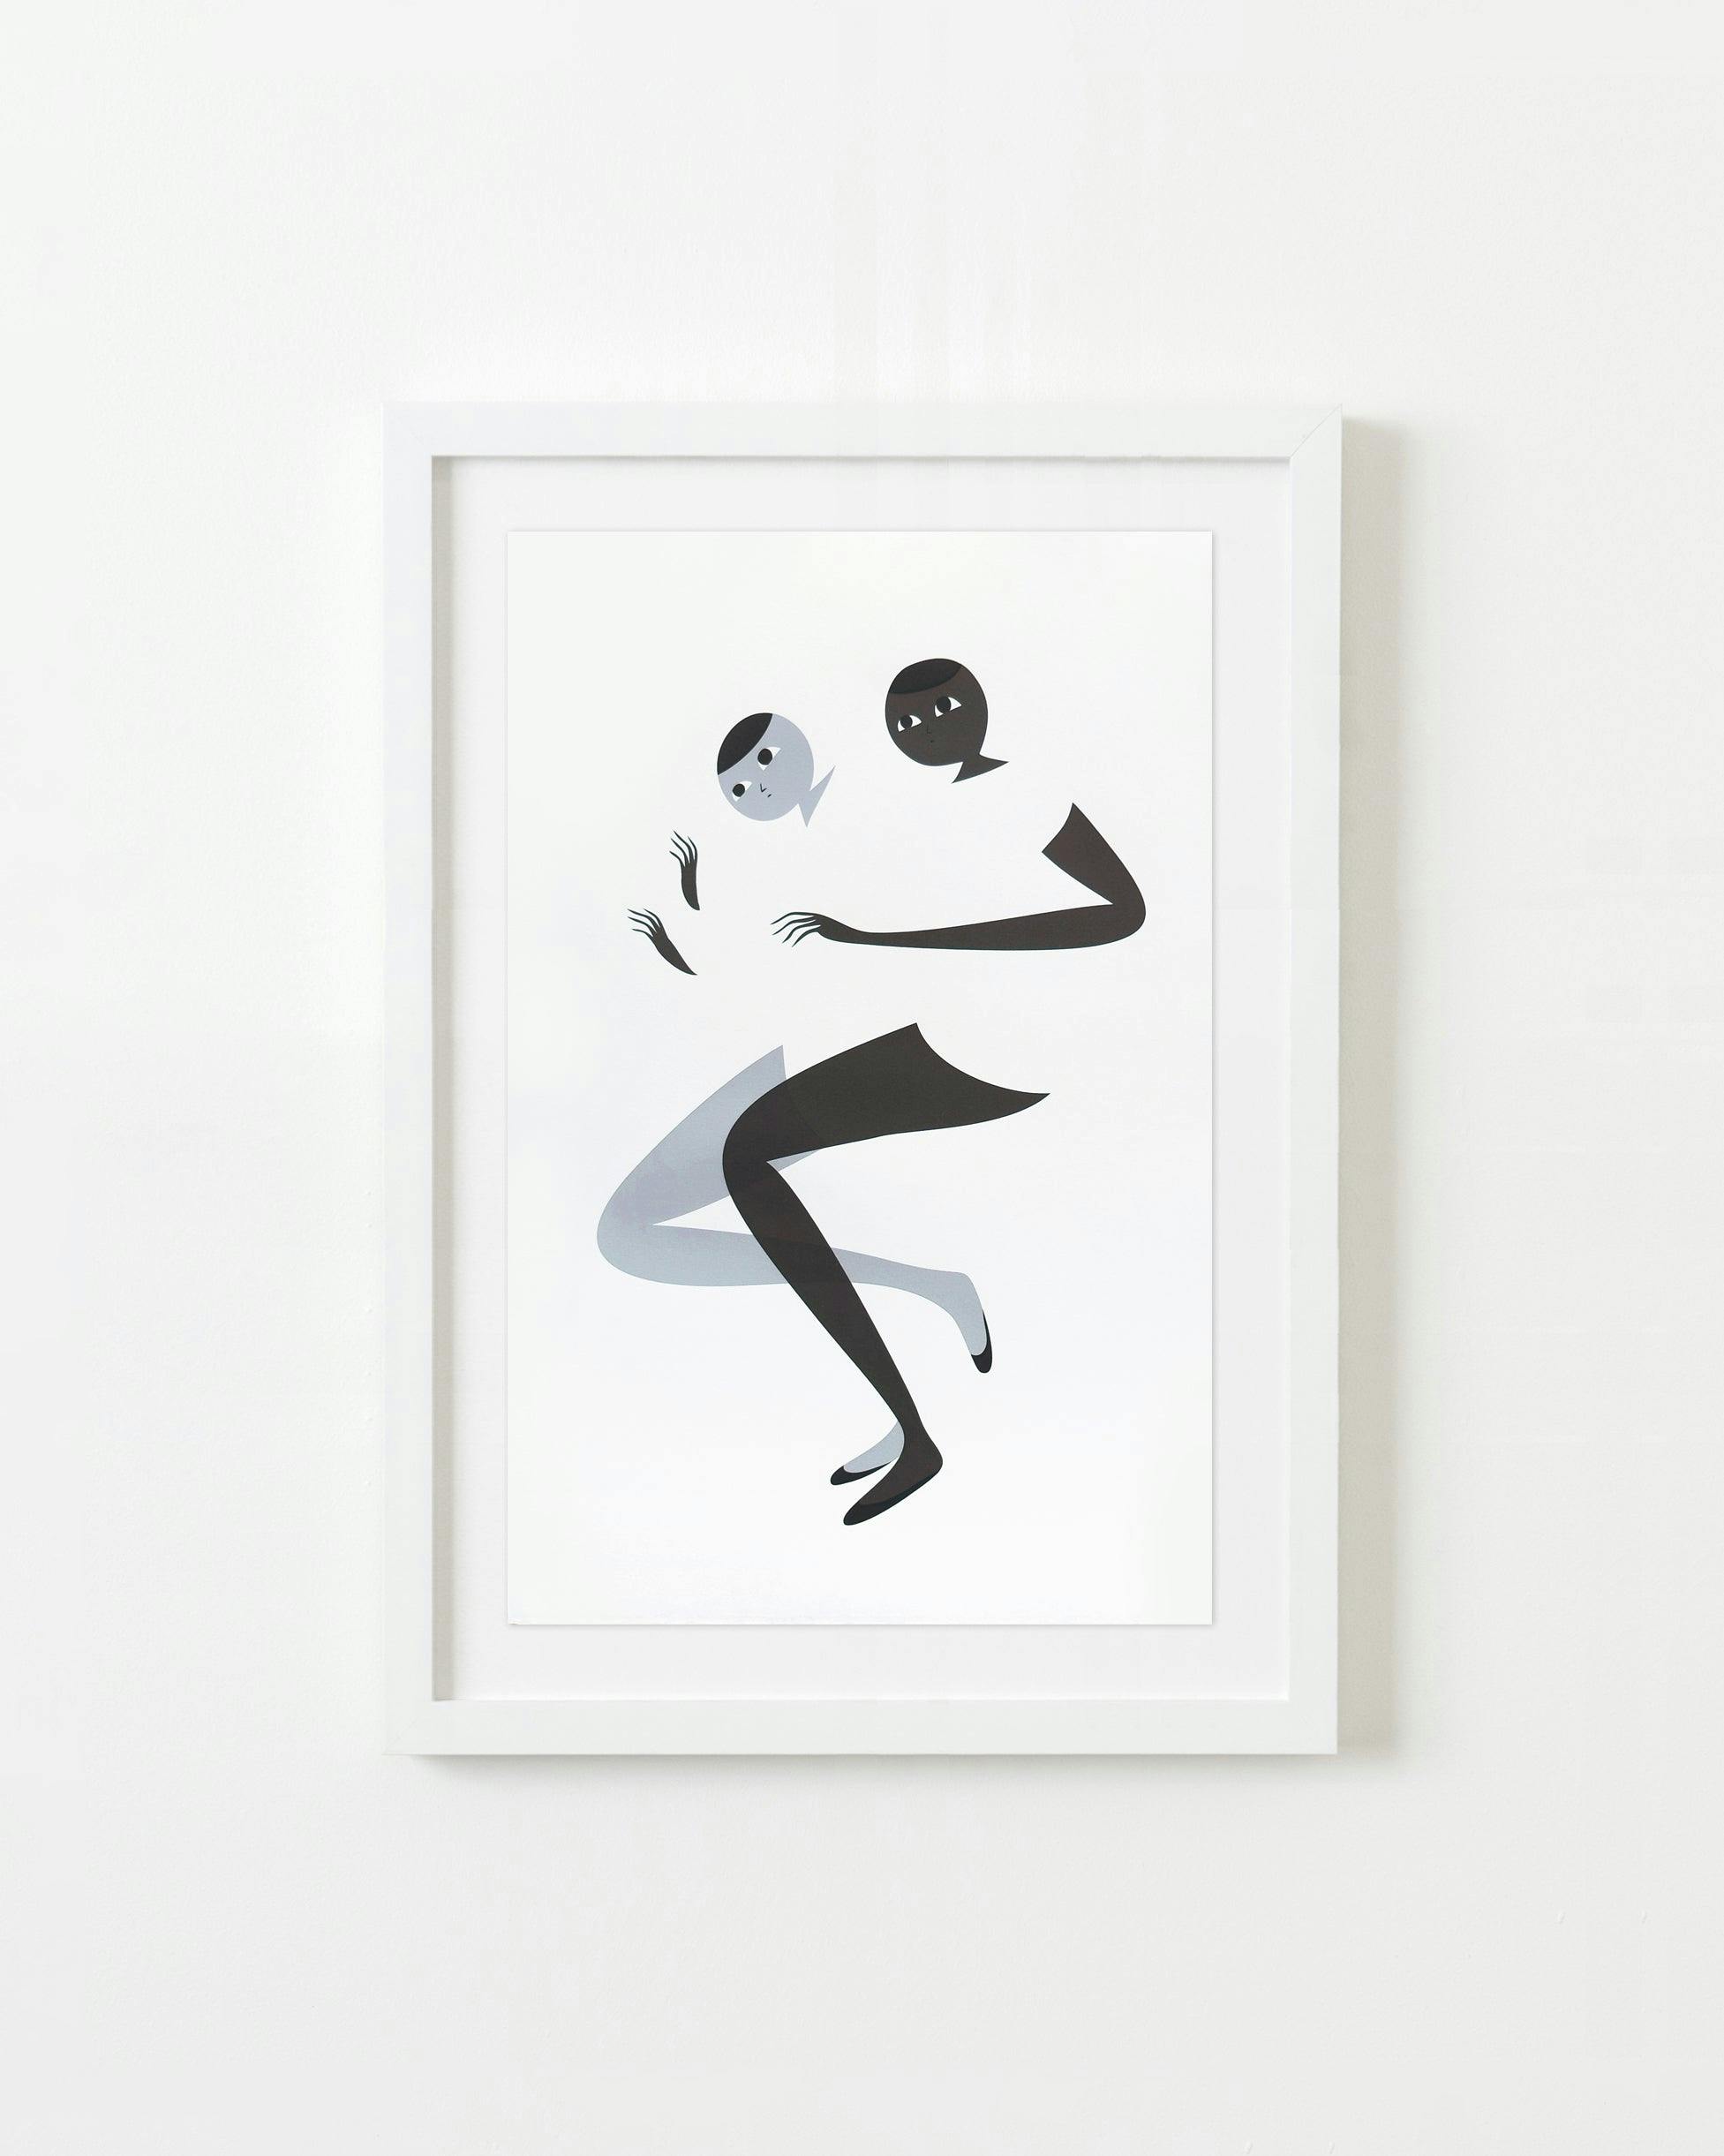 Print by Santiago Ascui titled "Untitled Grey 5".